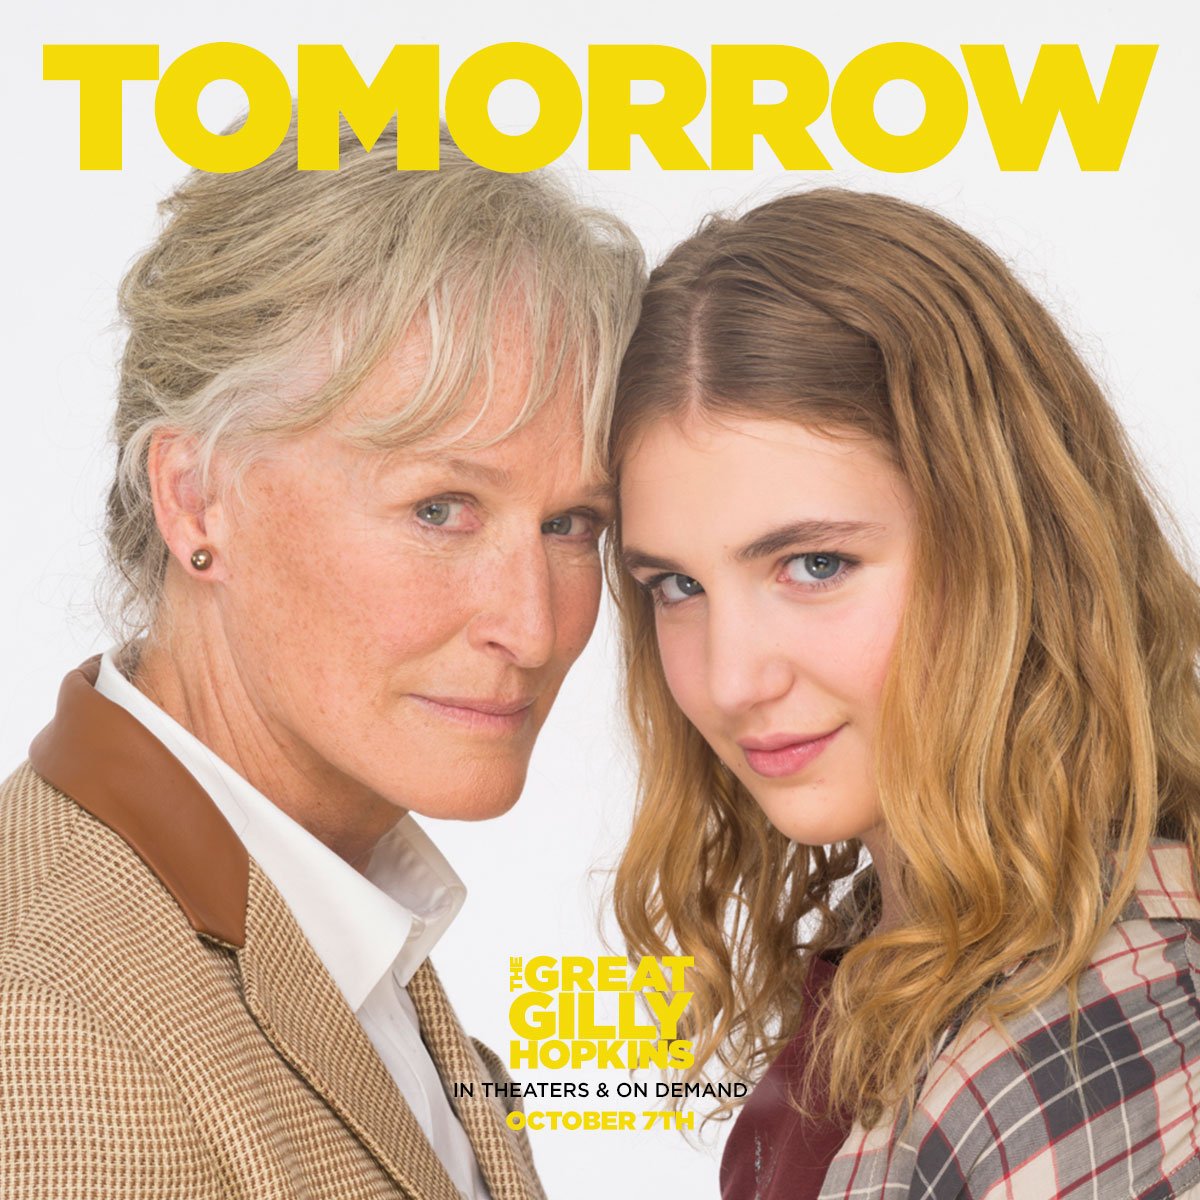 Determination runs in the family. Watch @TheGlennClose and @Sophie_Nelisse in #TheGreatGillyHopkins tomorrow!